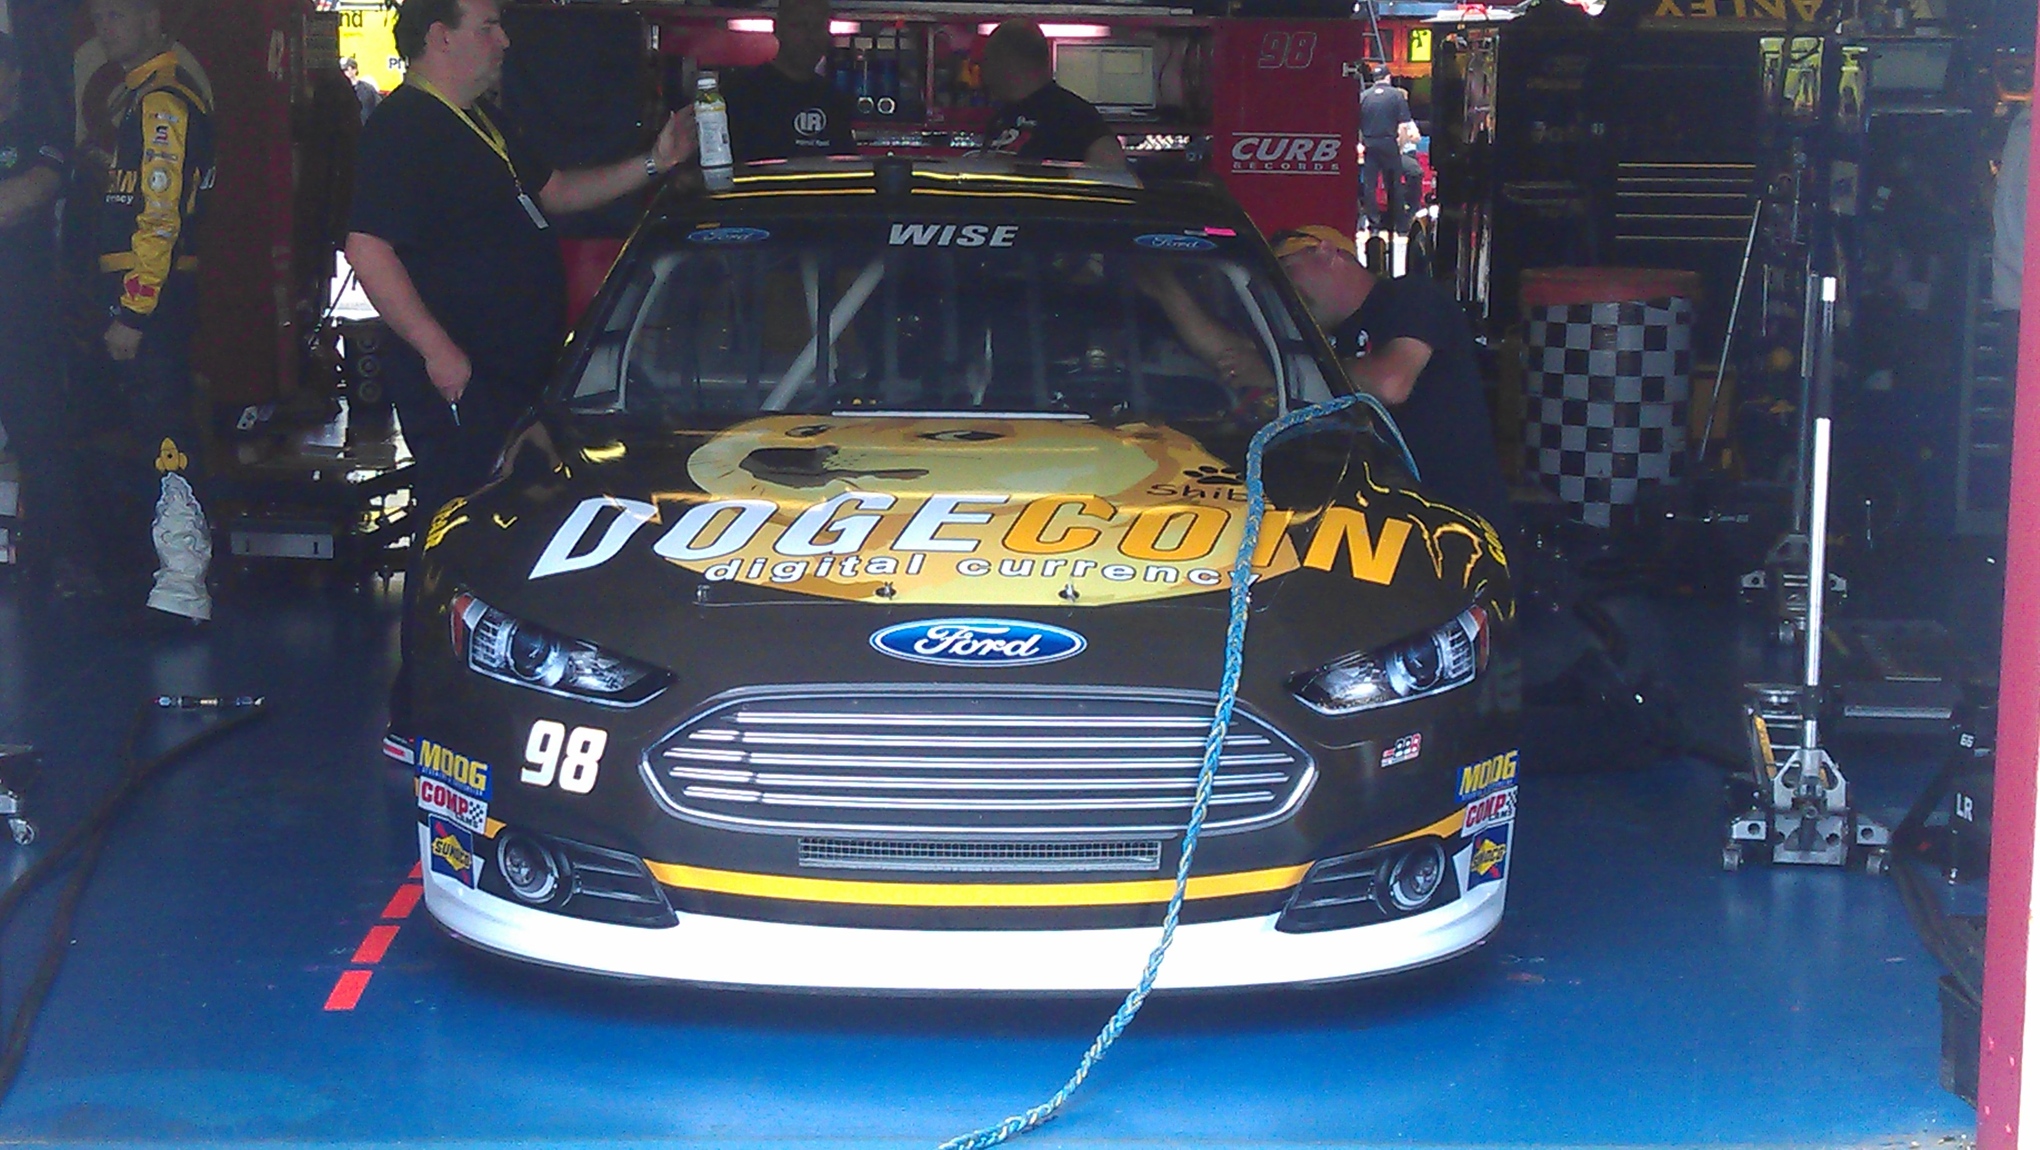 First Look At The Dogecoin Car In A Nascar Garage